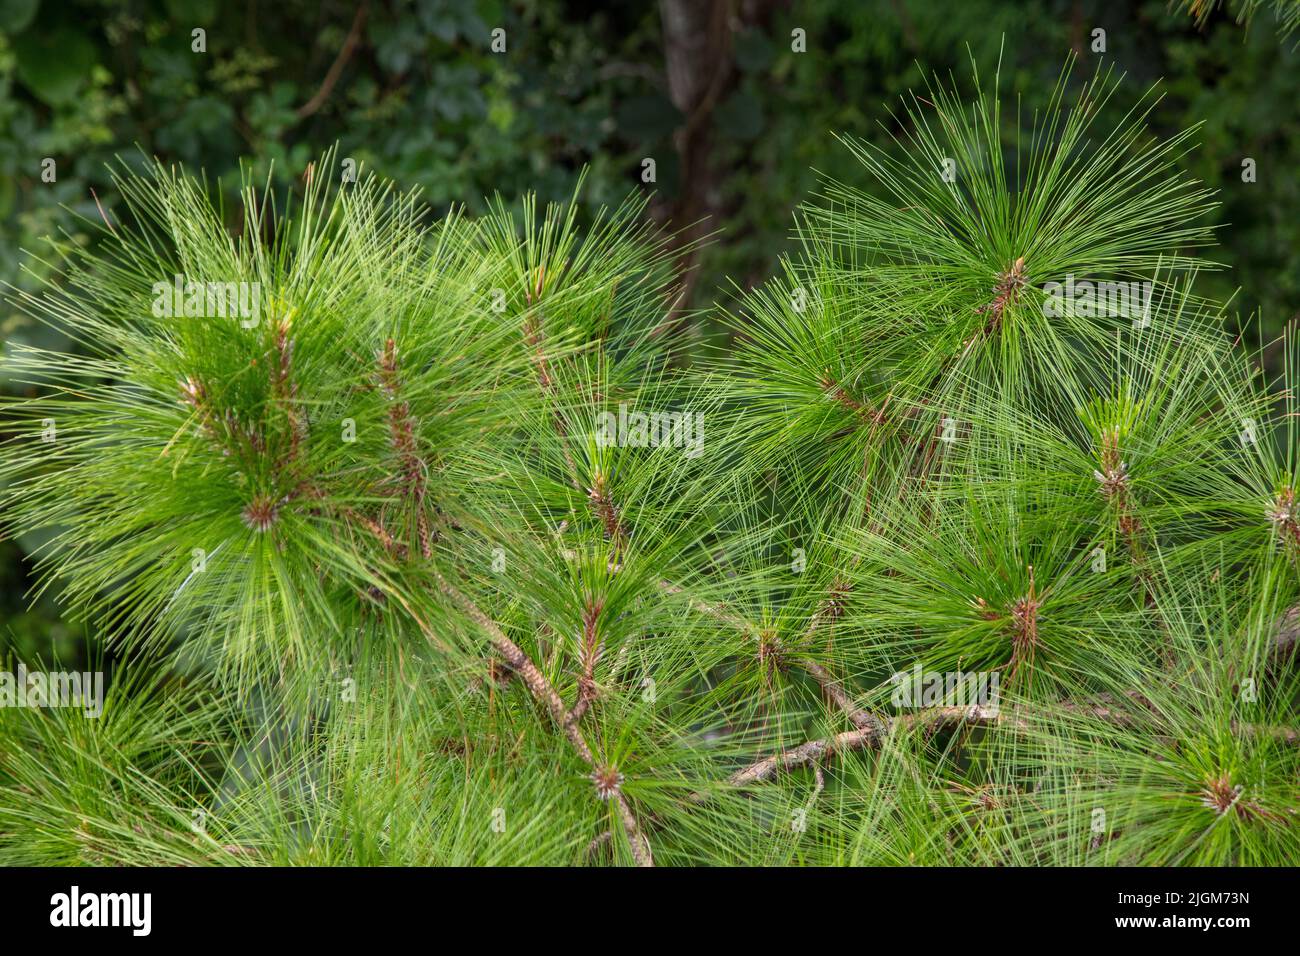 Pine trees are viewed from the canopy walkway at the Queen Sirikit Botanical Garden not far from CHIANG MAI, THAILAND Stock Photo